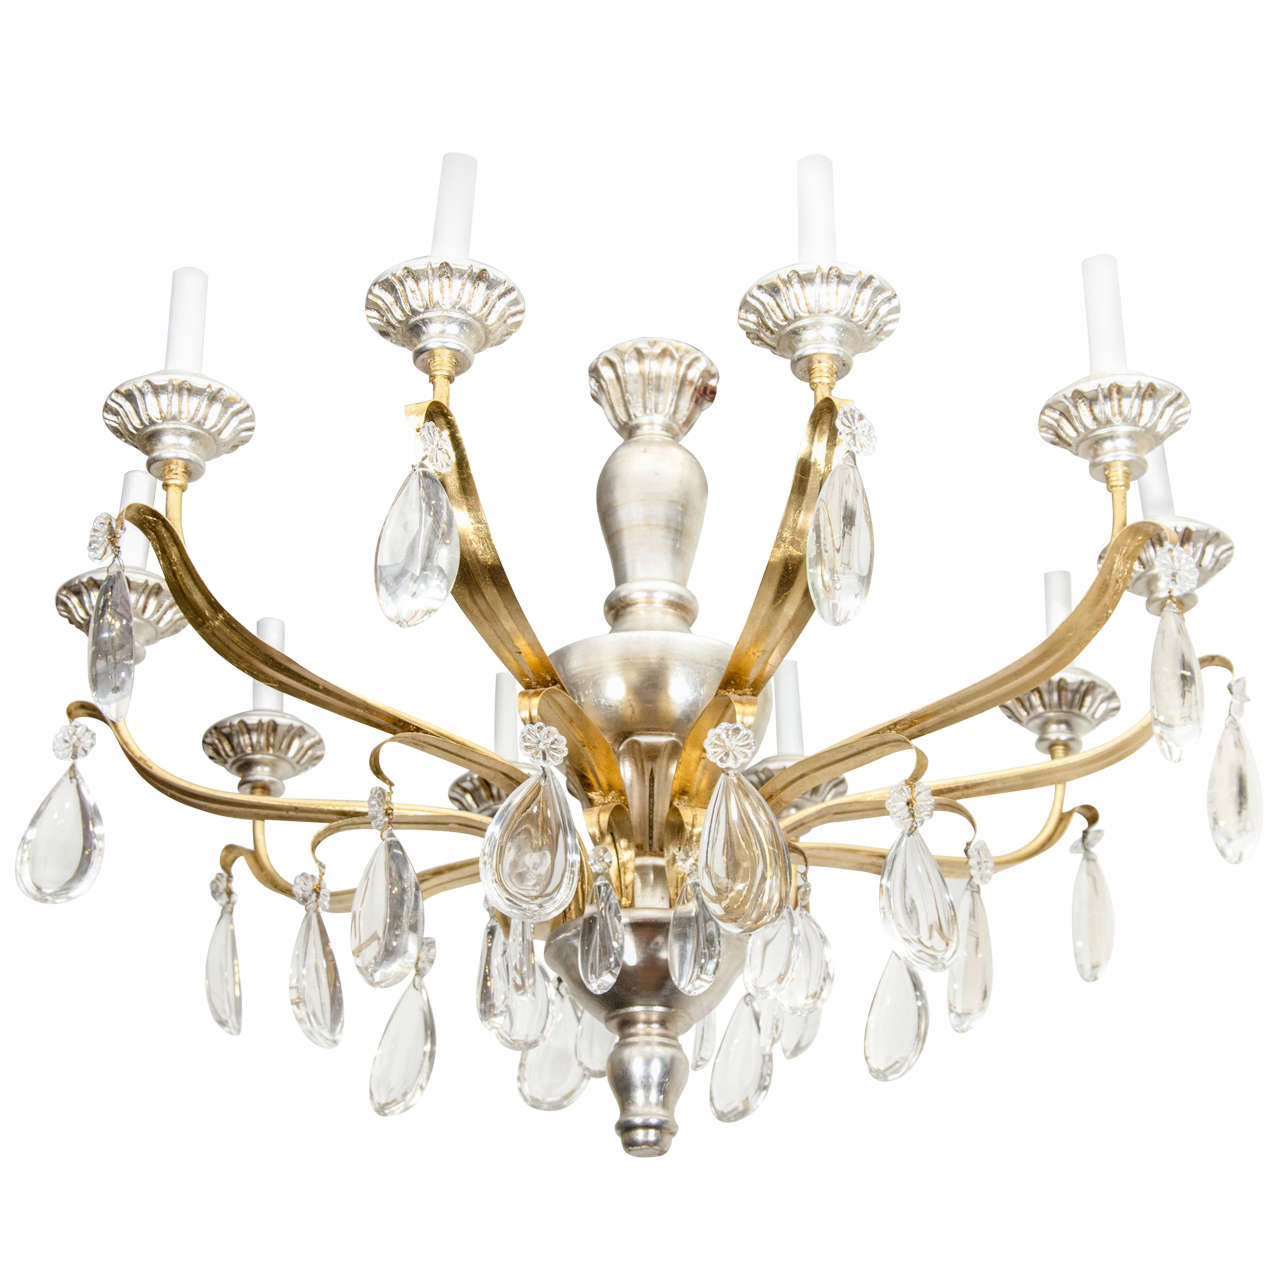 Midcentury 10-Light French Chandelier in Gilt Wood